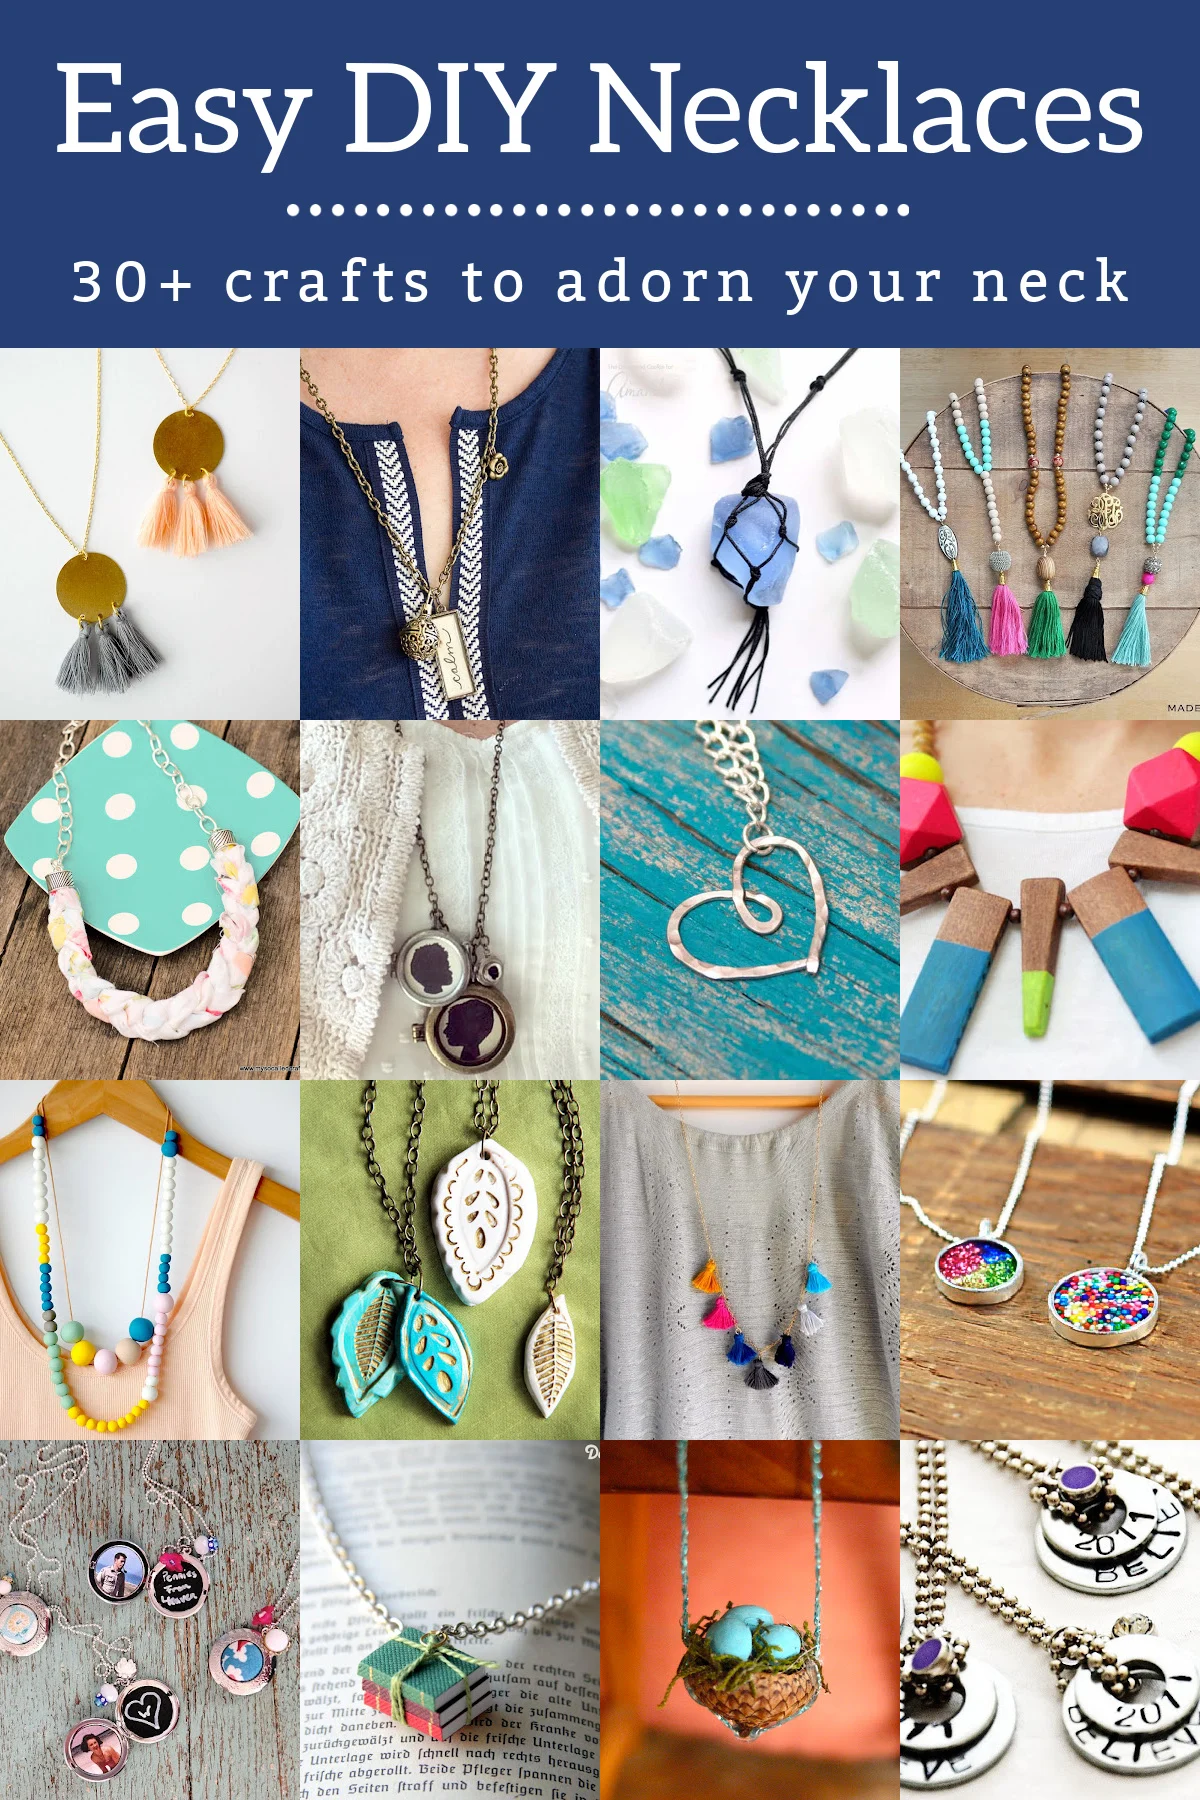 50 DIY - SUMMER JEWELRY IDEAS - Bracelet, Necklace and more